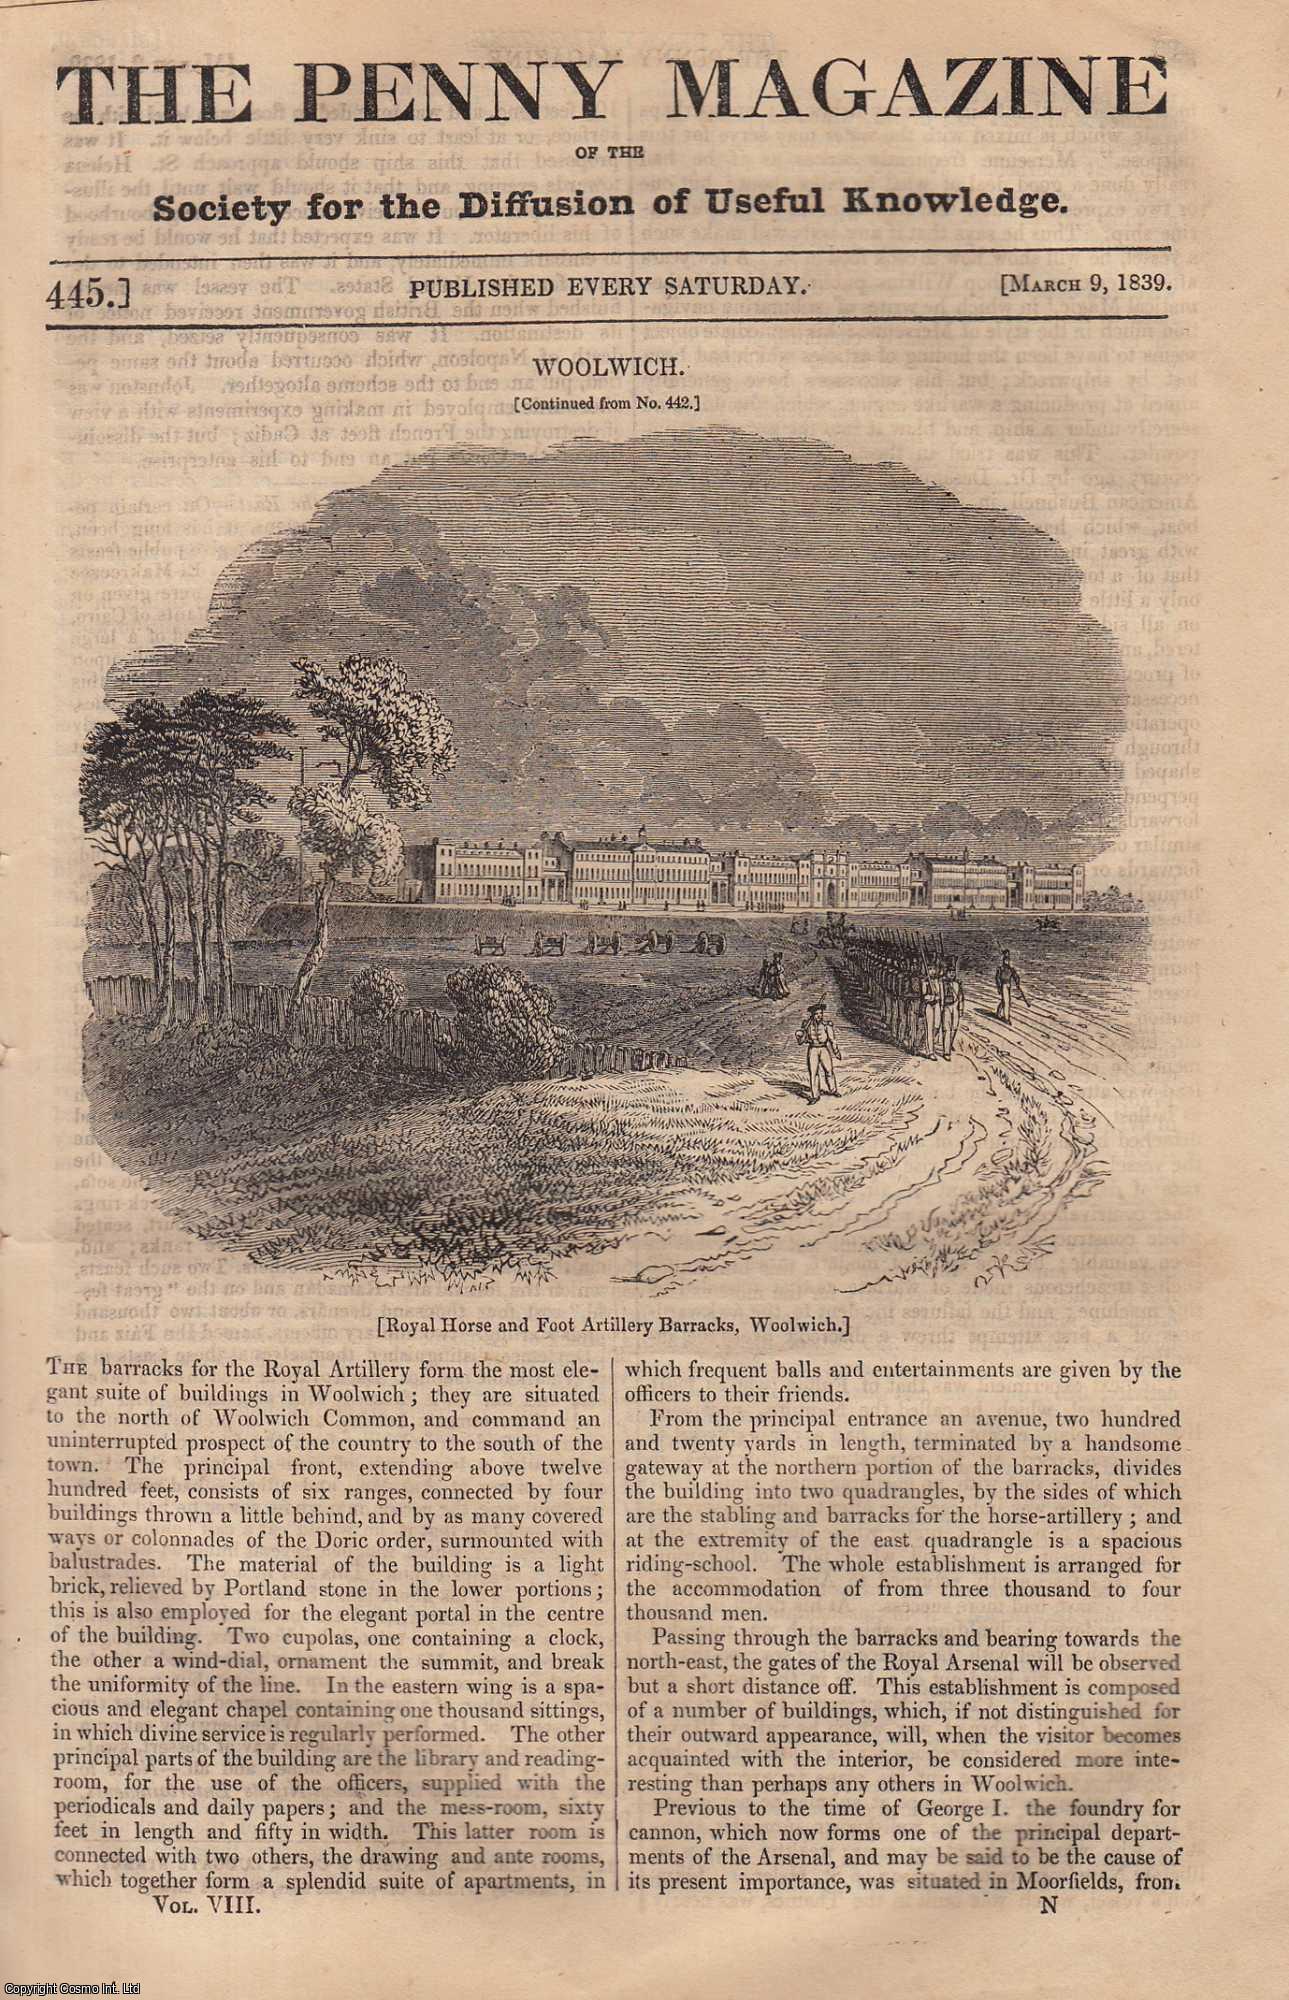 Penny Magazine - Woolwich (part 2) (Grand Military & Naval Depot for England); Progress of Steam Navigation; Progress of The Art of Illuminating Manuscripts (part 4), etc. Issue No. 445, 1839. A complete original weekly issue of the Penny Magazine, 1839.